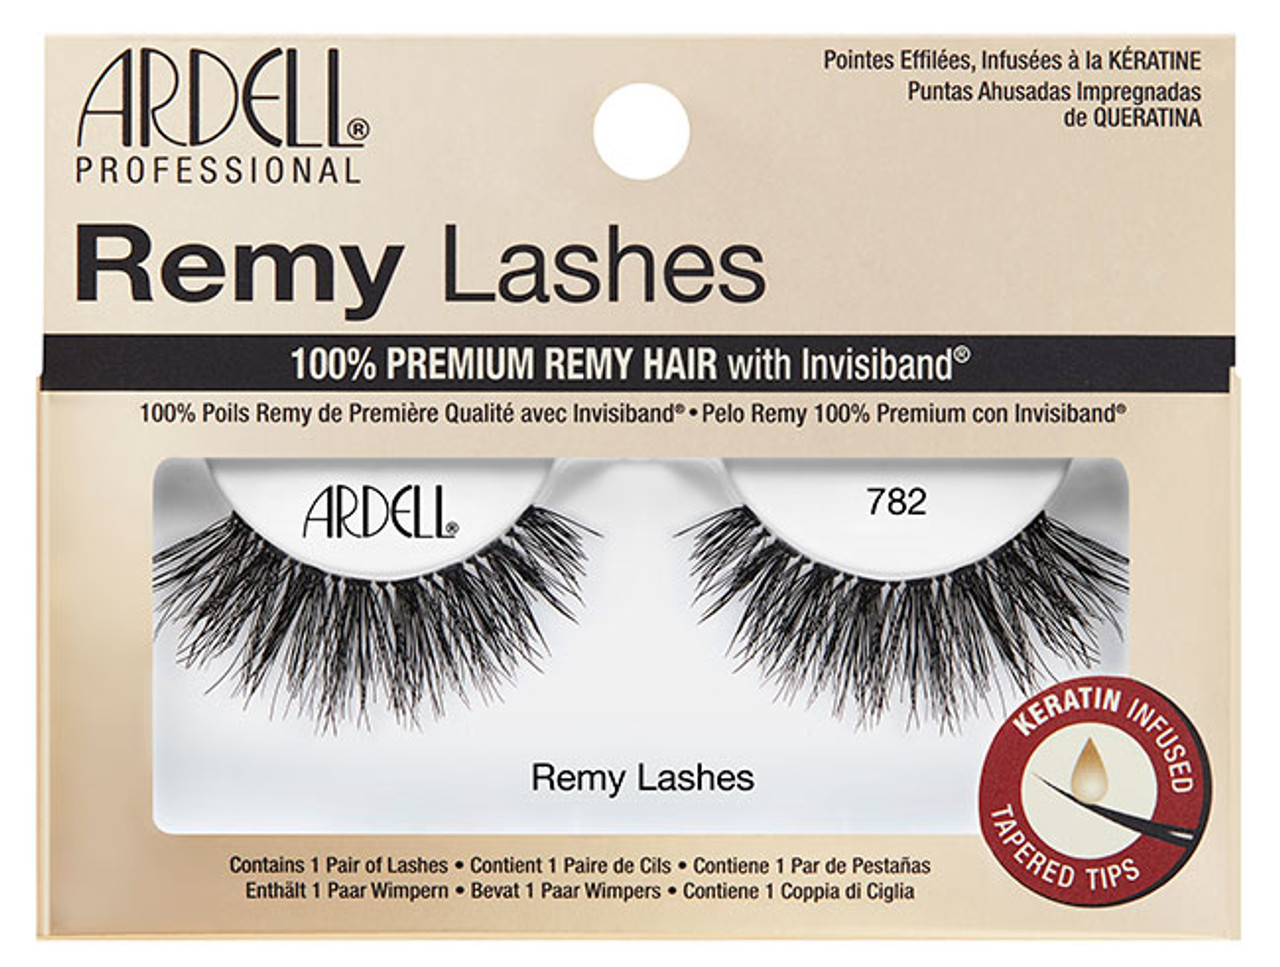 Ardell Professional Remy Lashes - 782